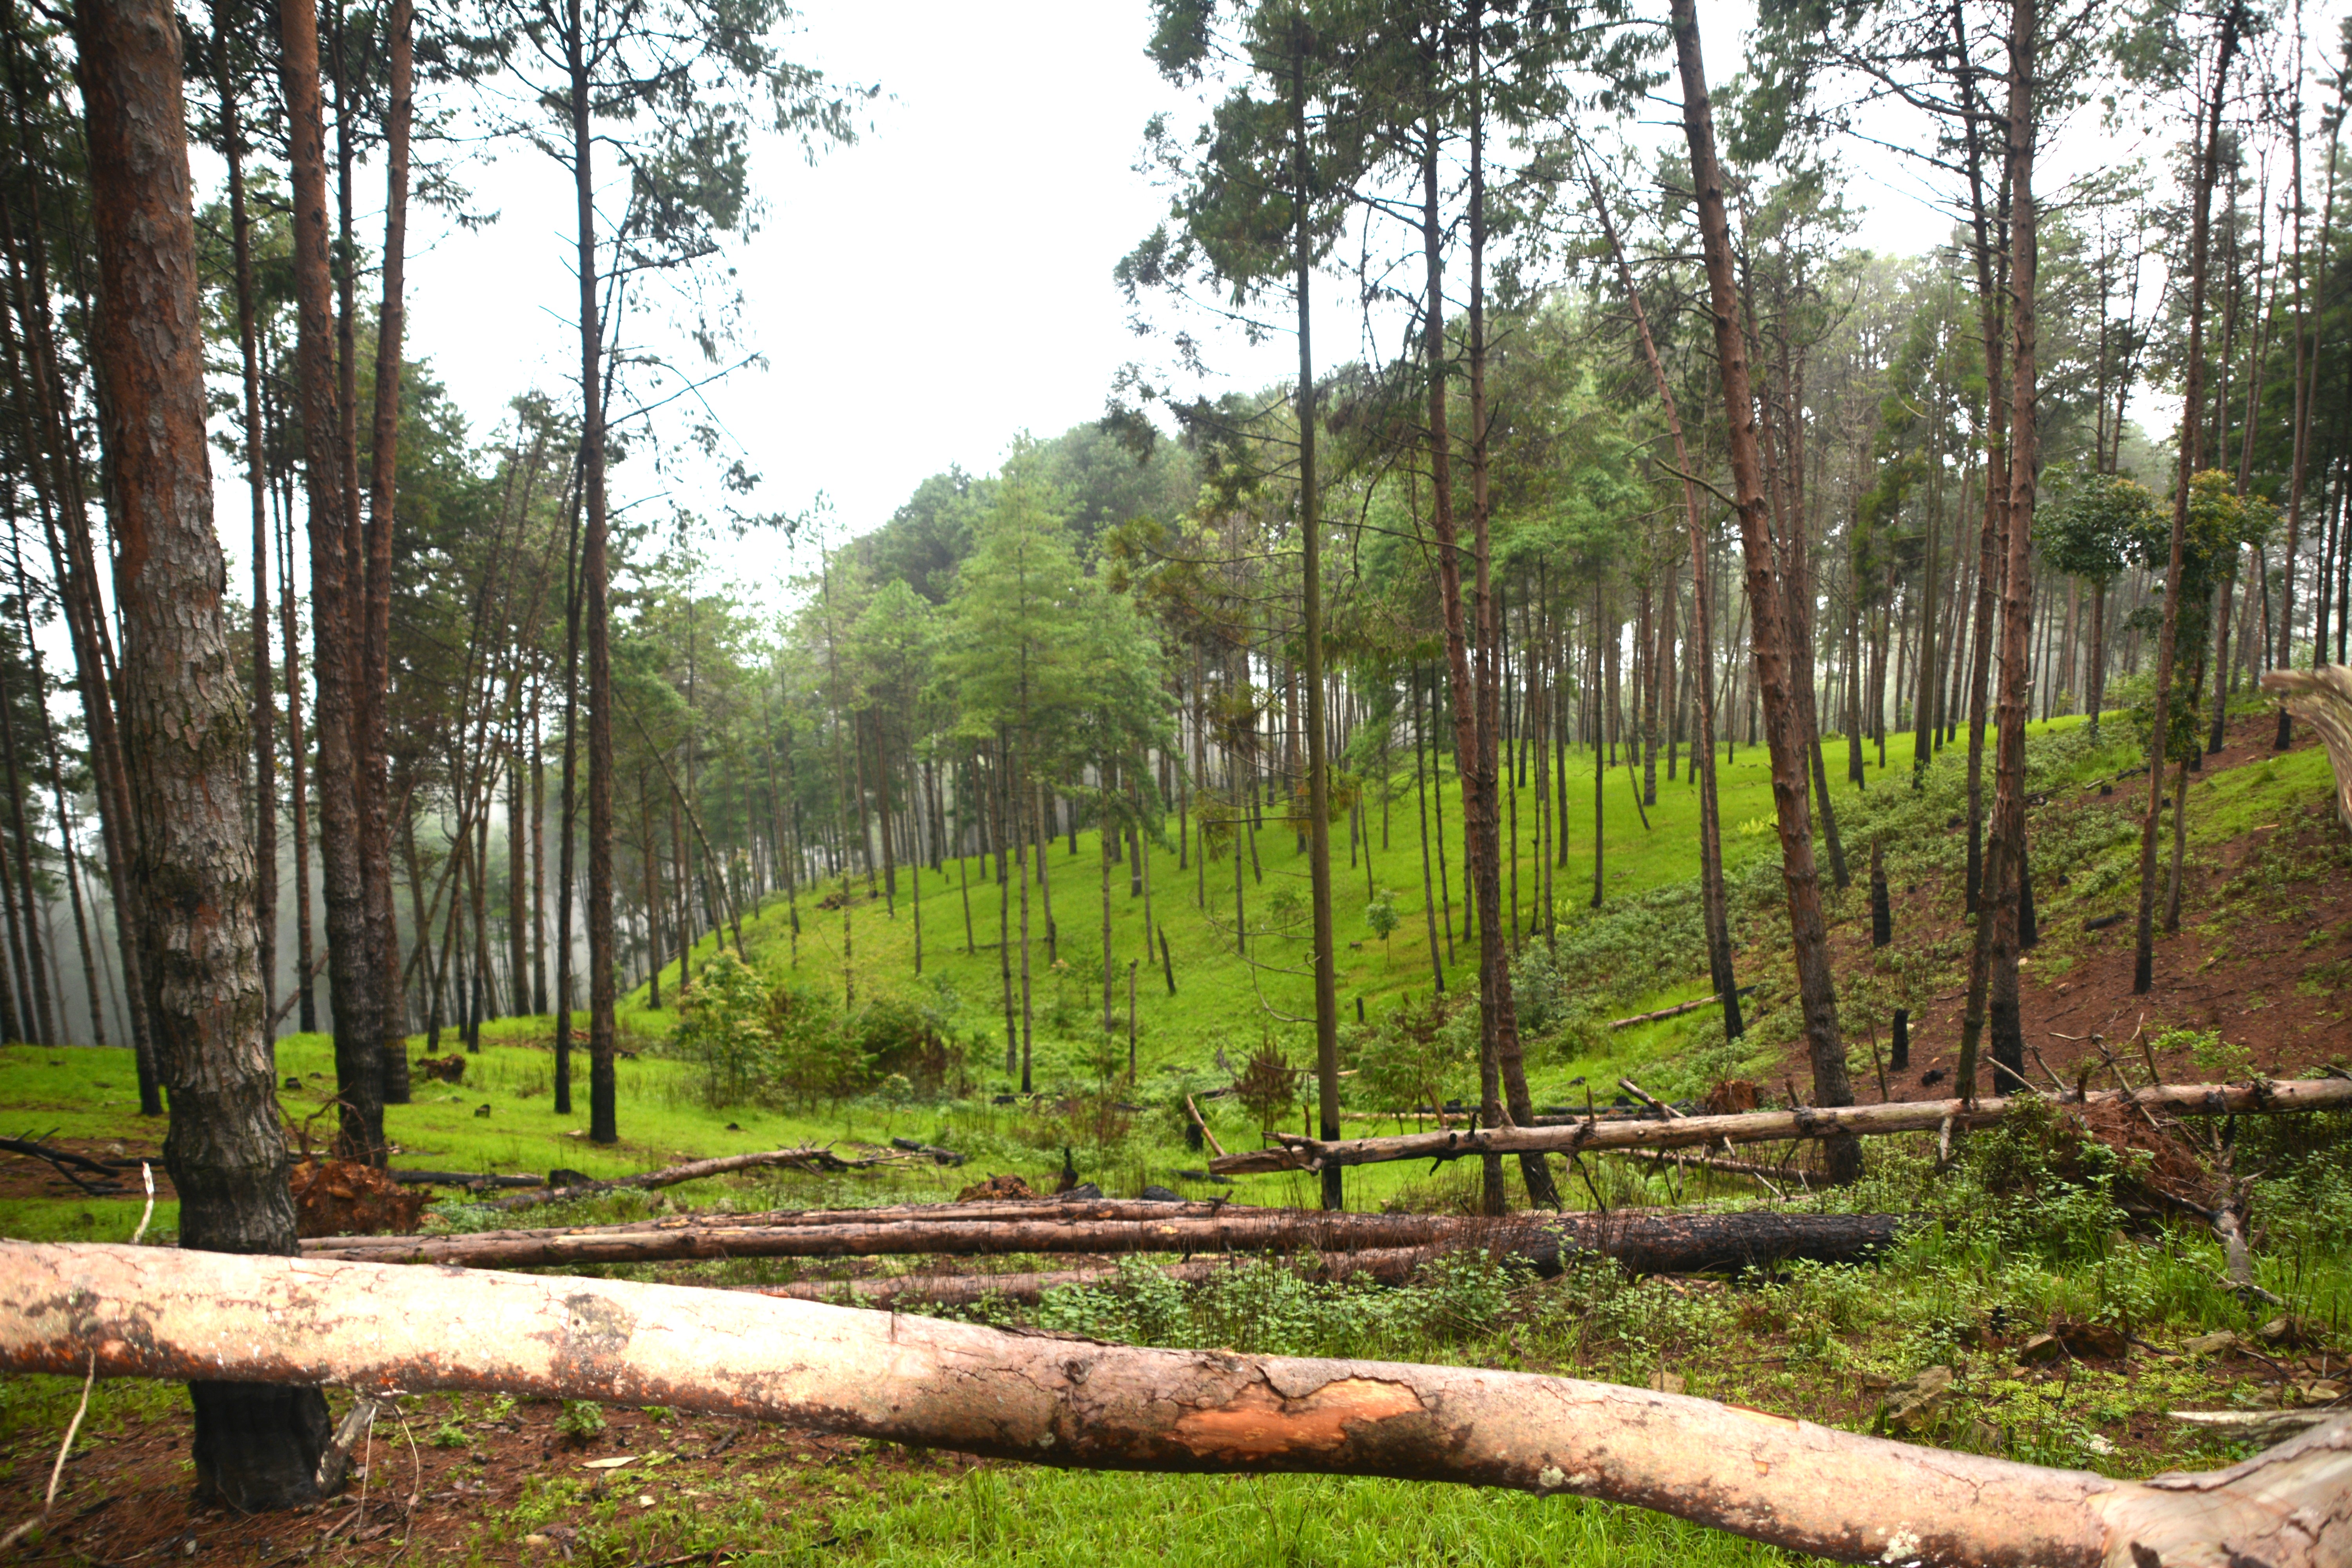 Damage caused by a windstorm in Rachama Community Forest, Nepal